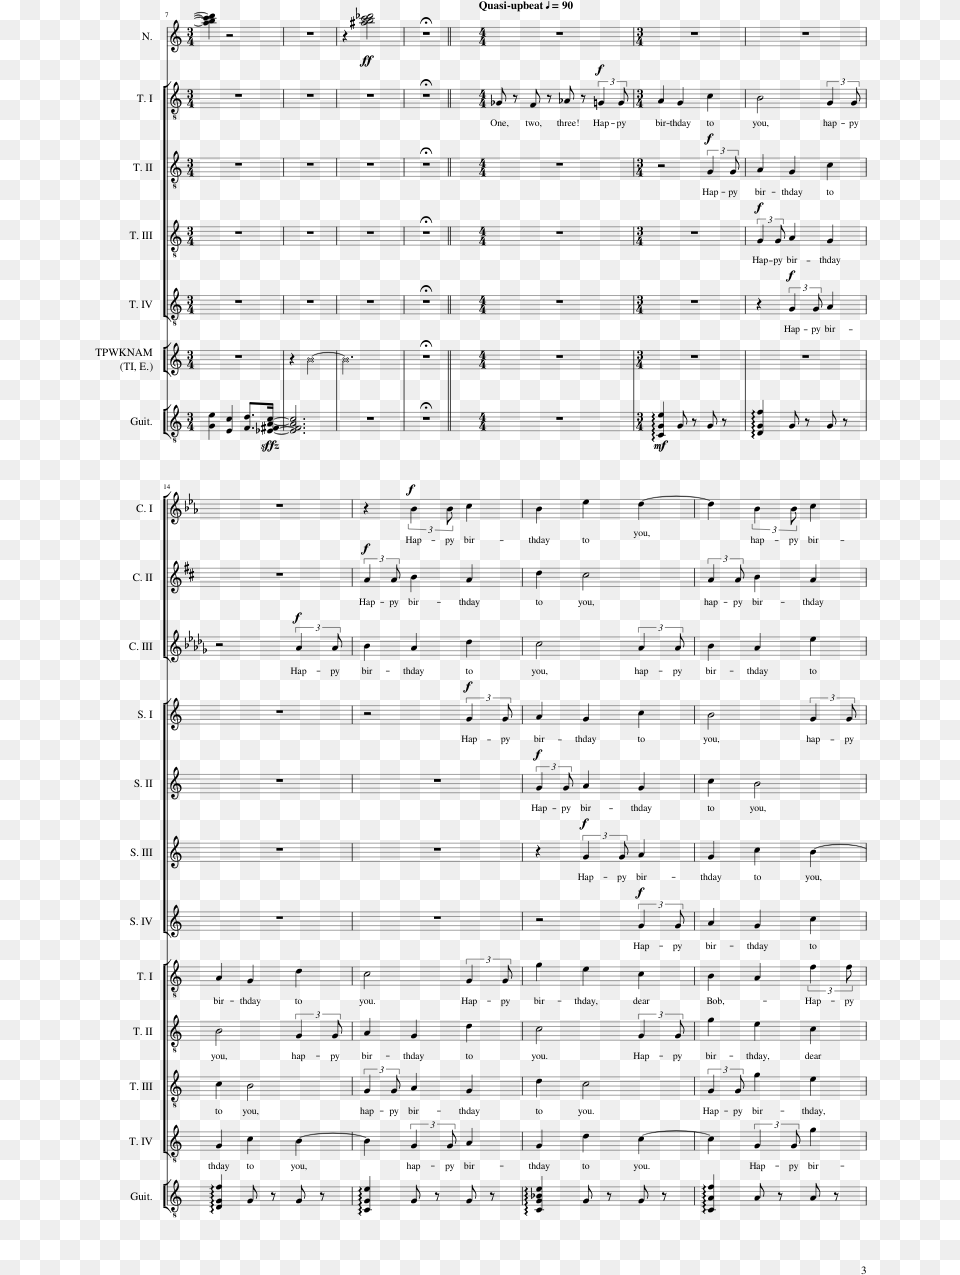 Happy Birthday To You Sheet Music Composed By Original Monochrome, Gray Free Transparent Png